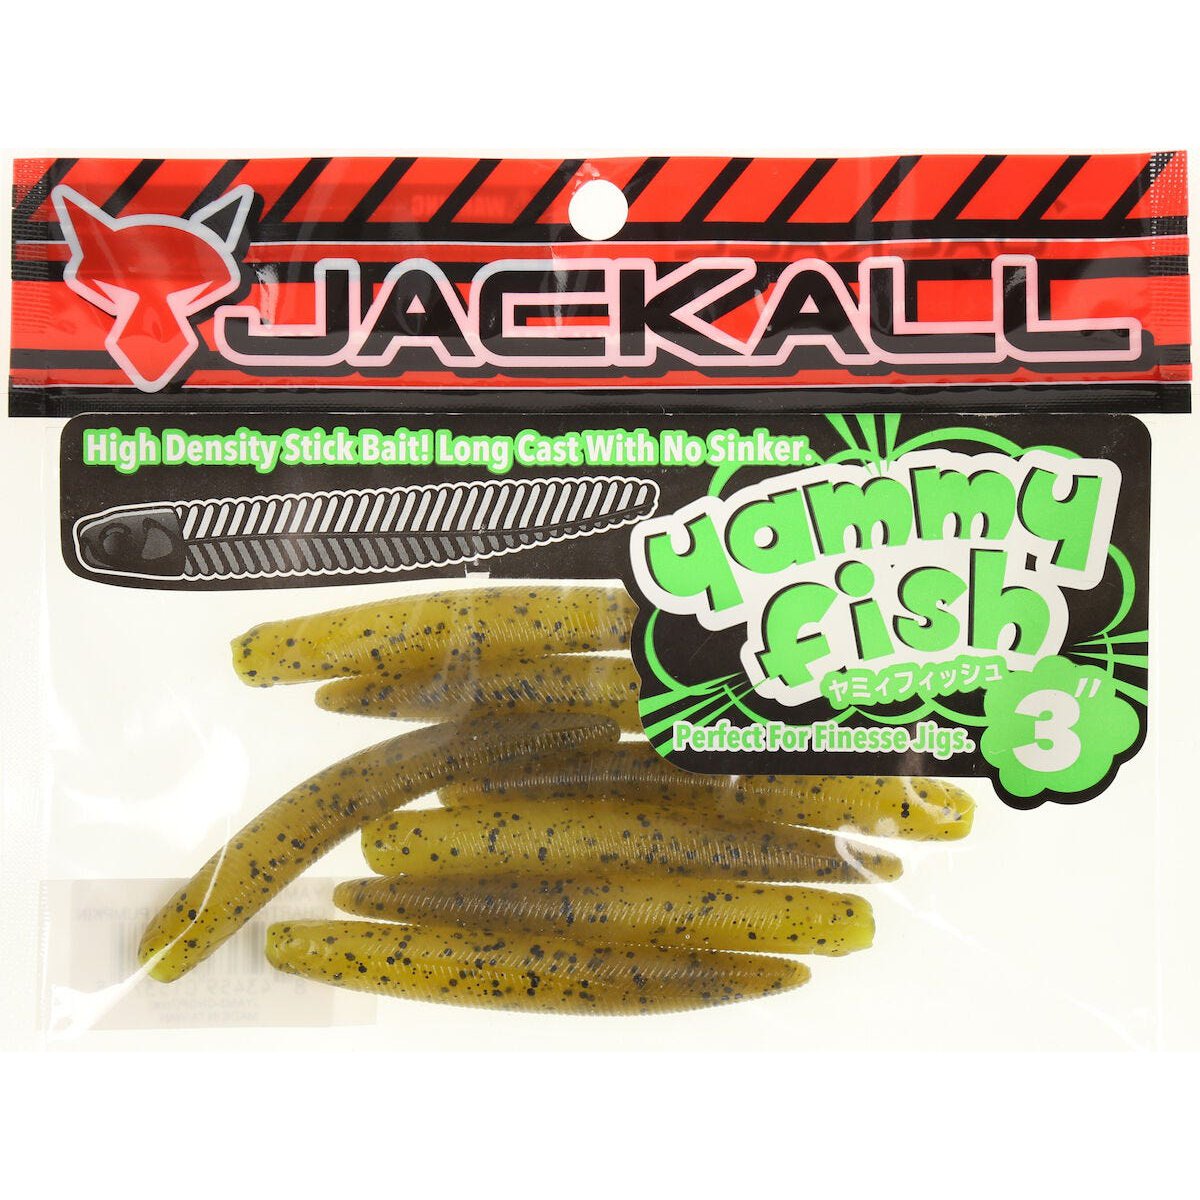 Yammyfish plastic lure 3in – Techniques Chasse et Pêche